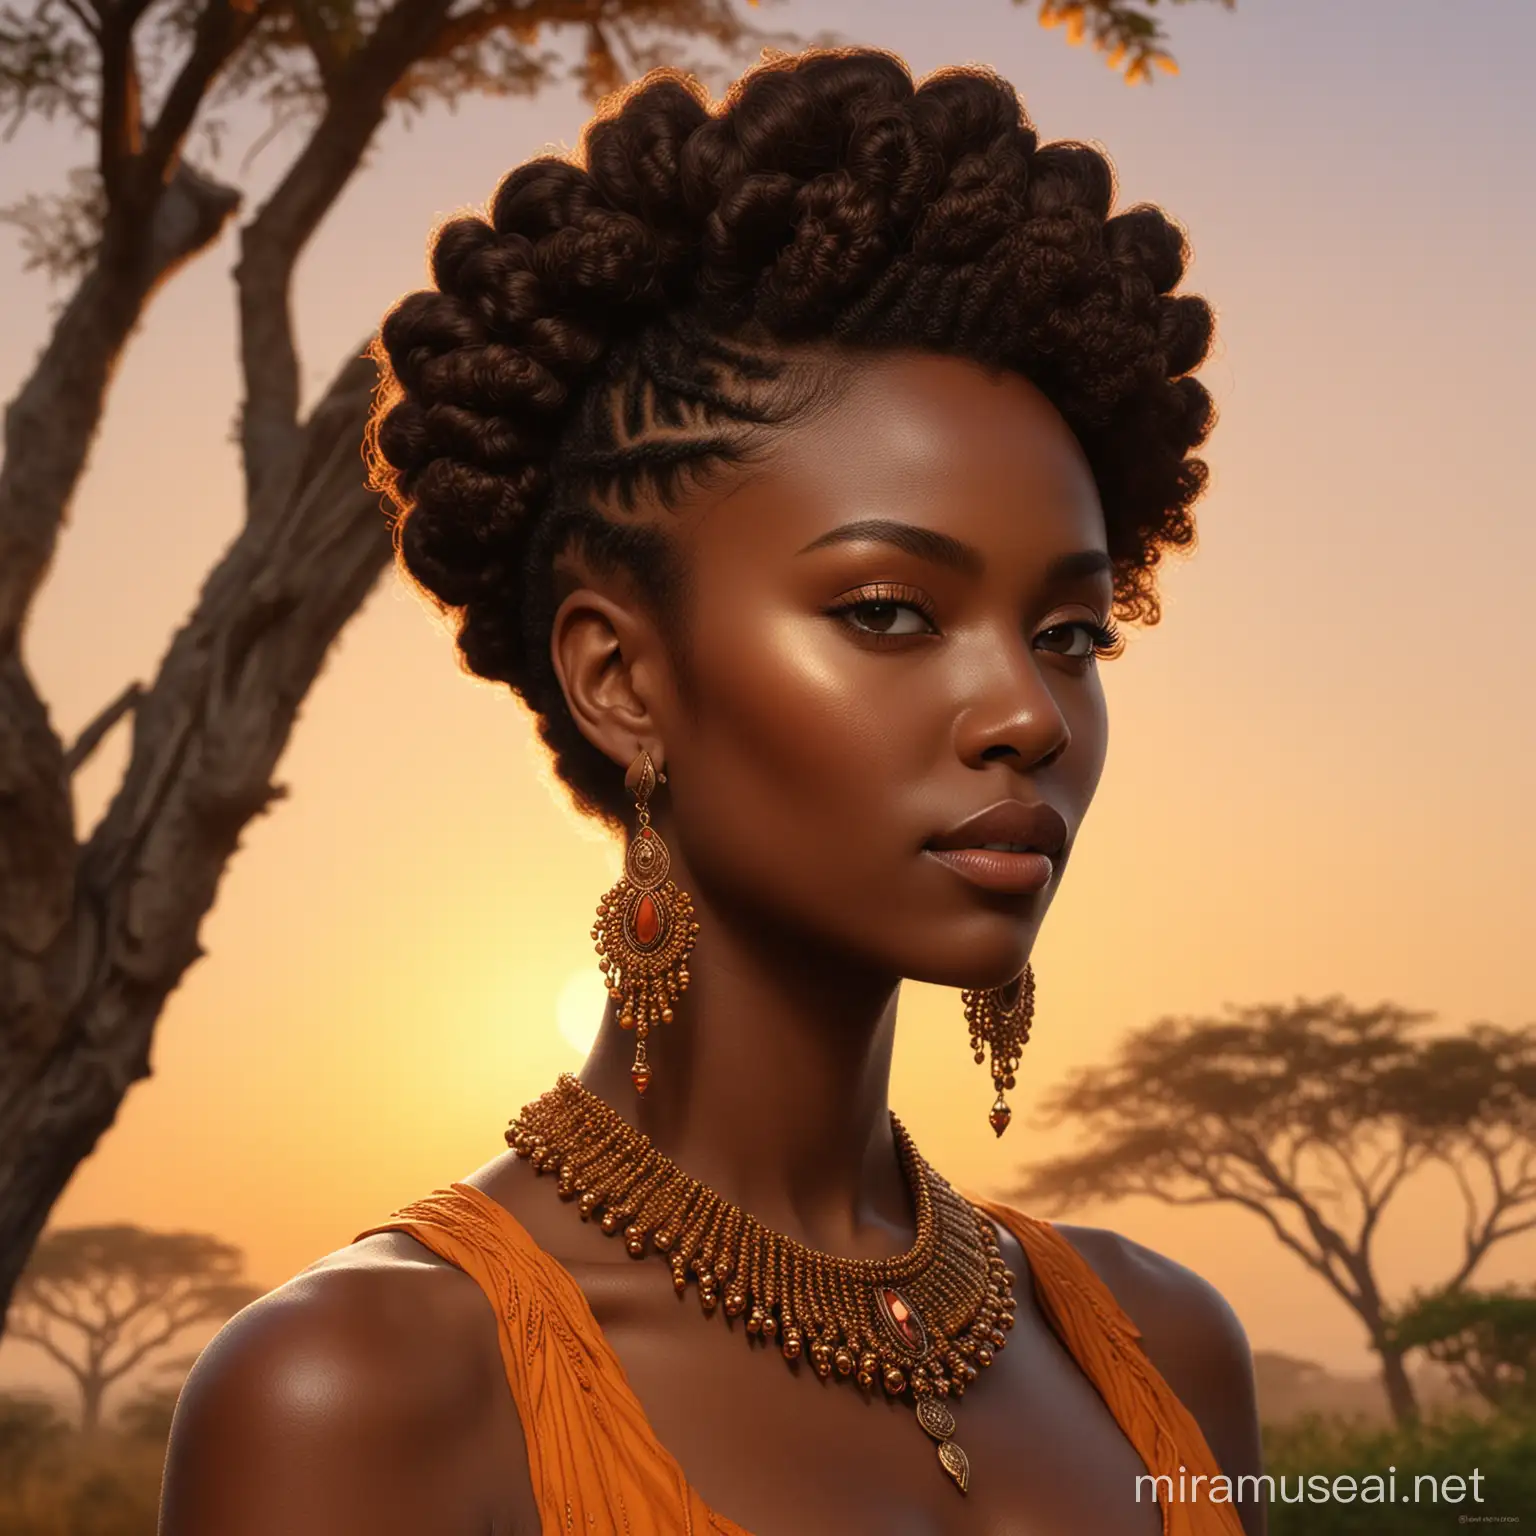 Regal African Woman Profile Portrait with Acacia Tree Silhouette at Sunset